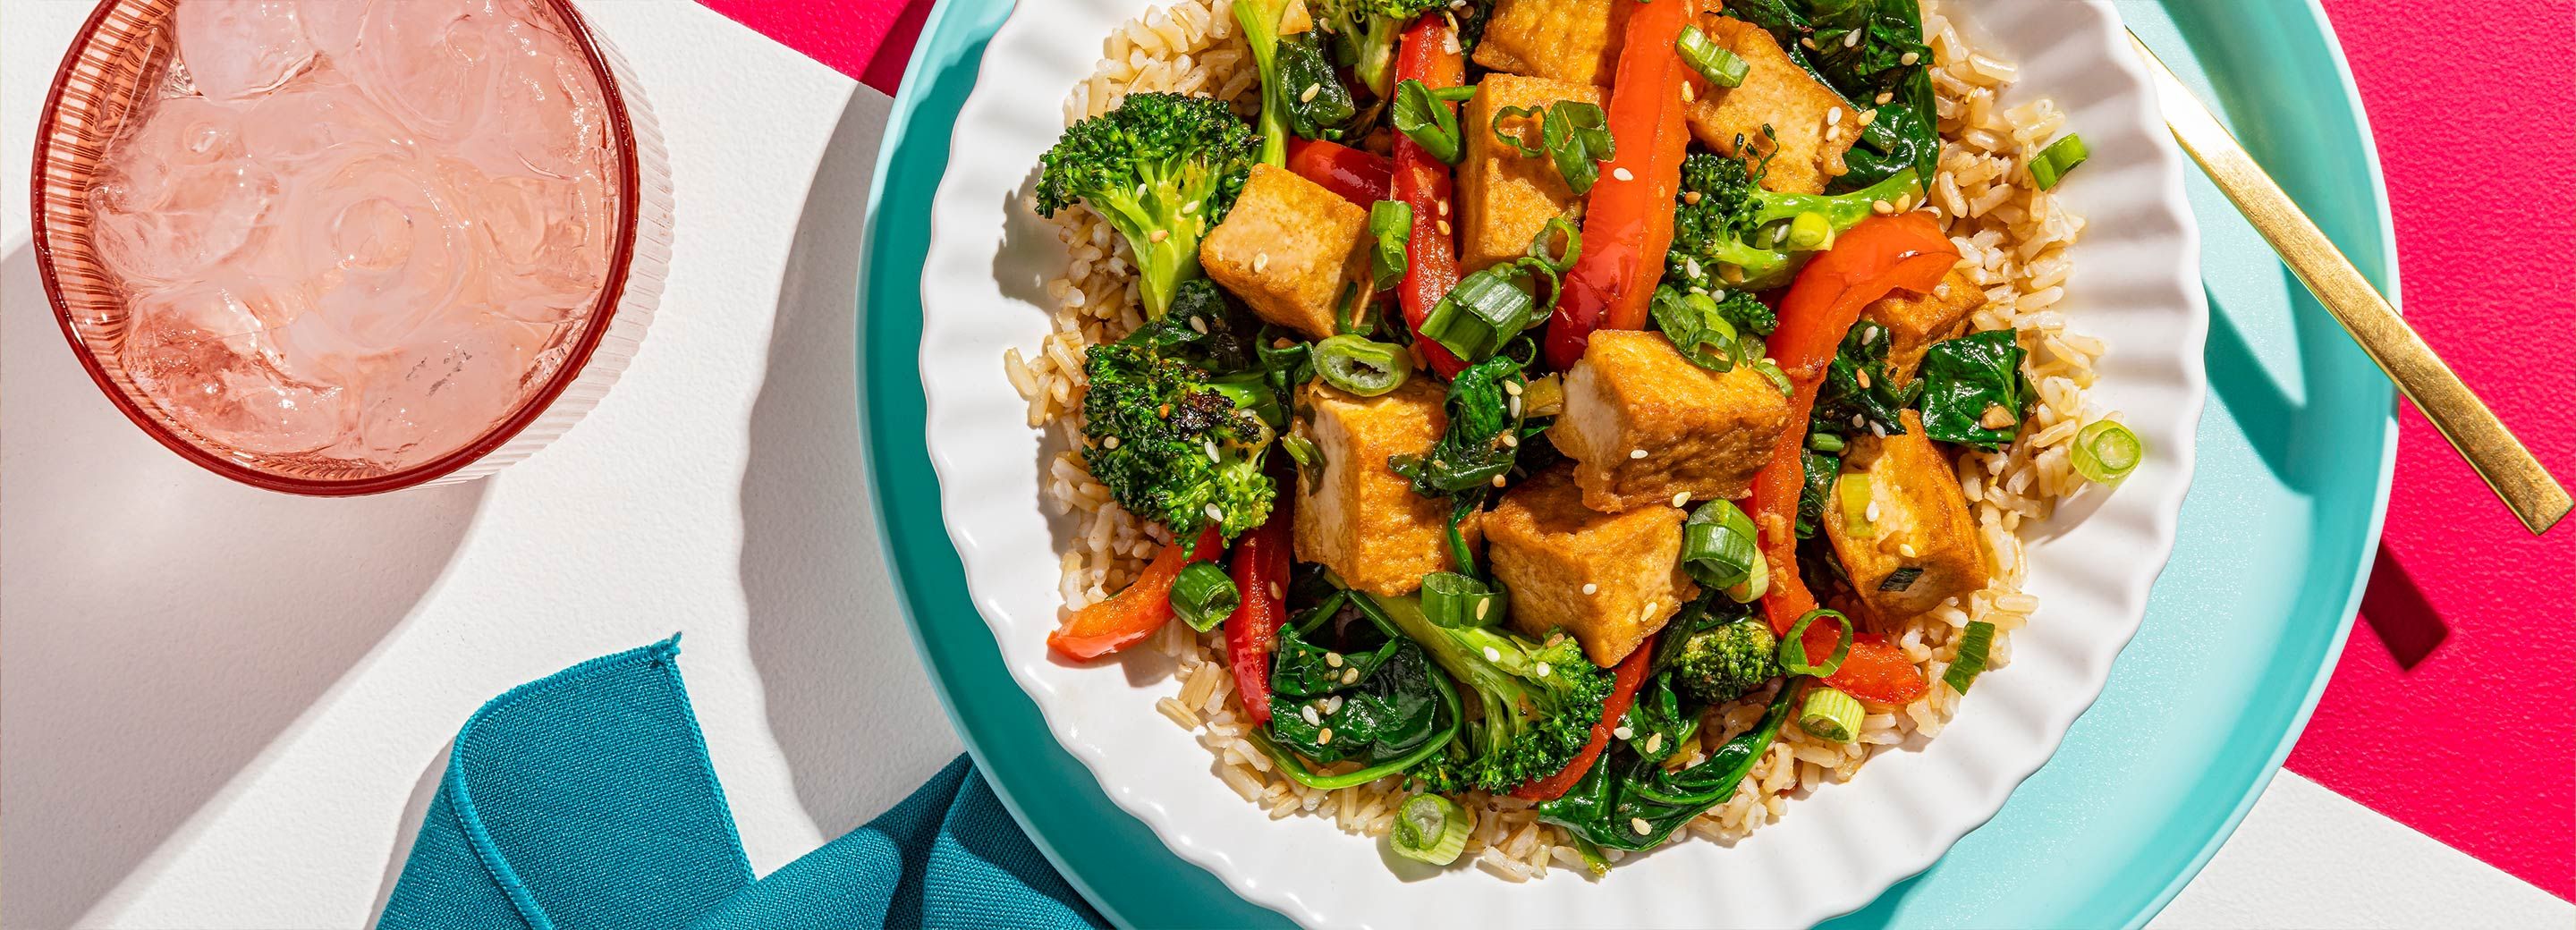 Spicy Tofu Stir-Fry with Brown Rice